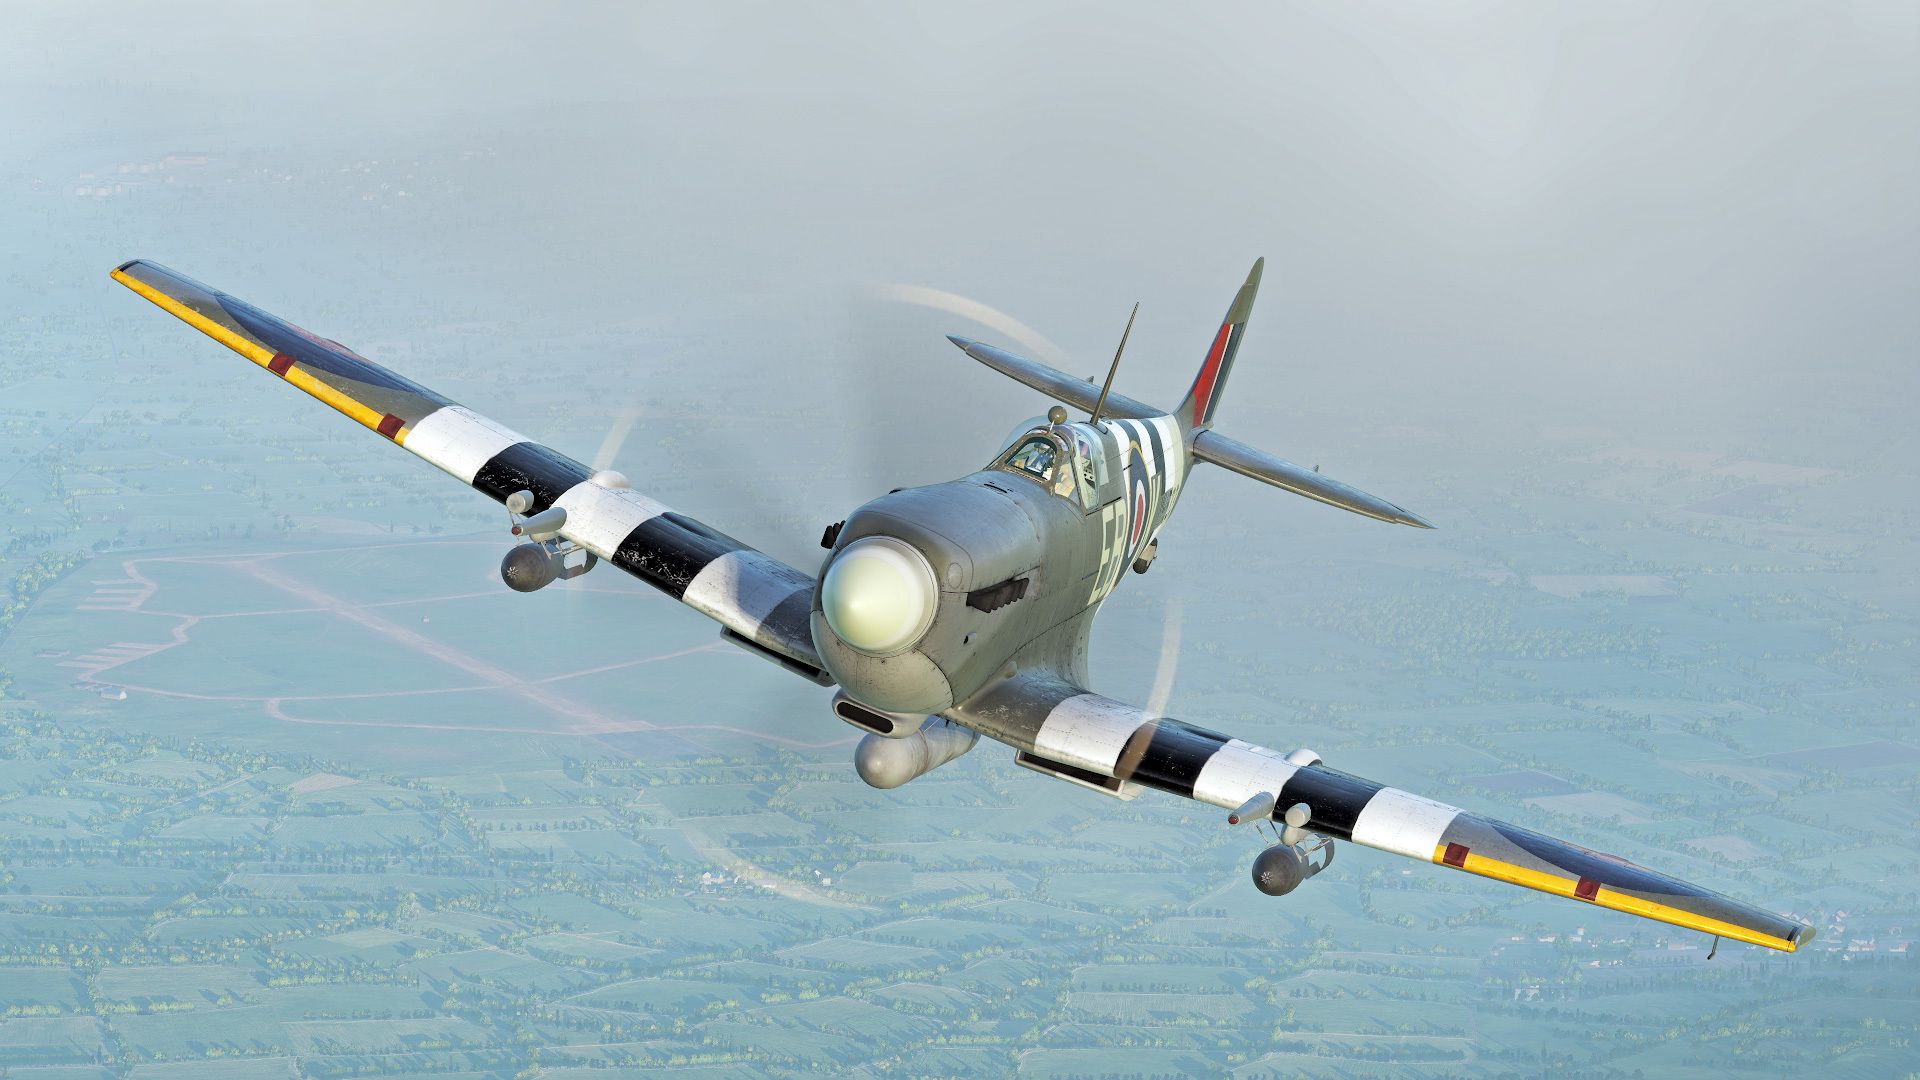 Steam - DCS World Steam Edition - How to bomb in the DCS: Spitfire Mk IX